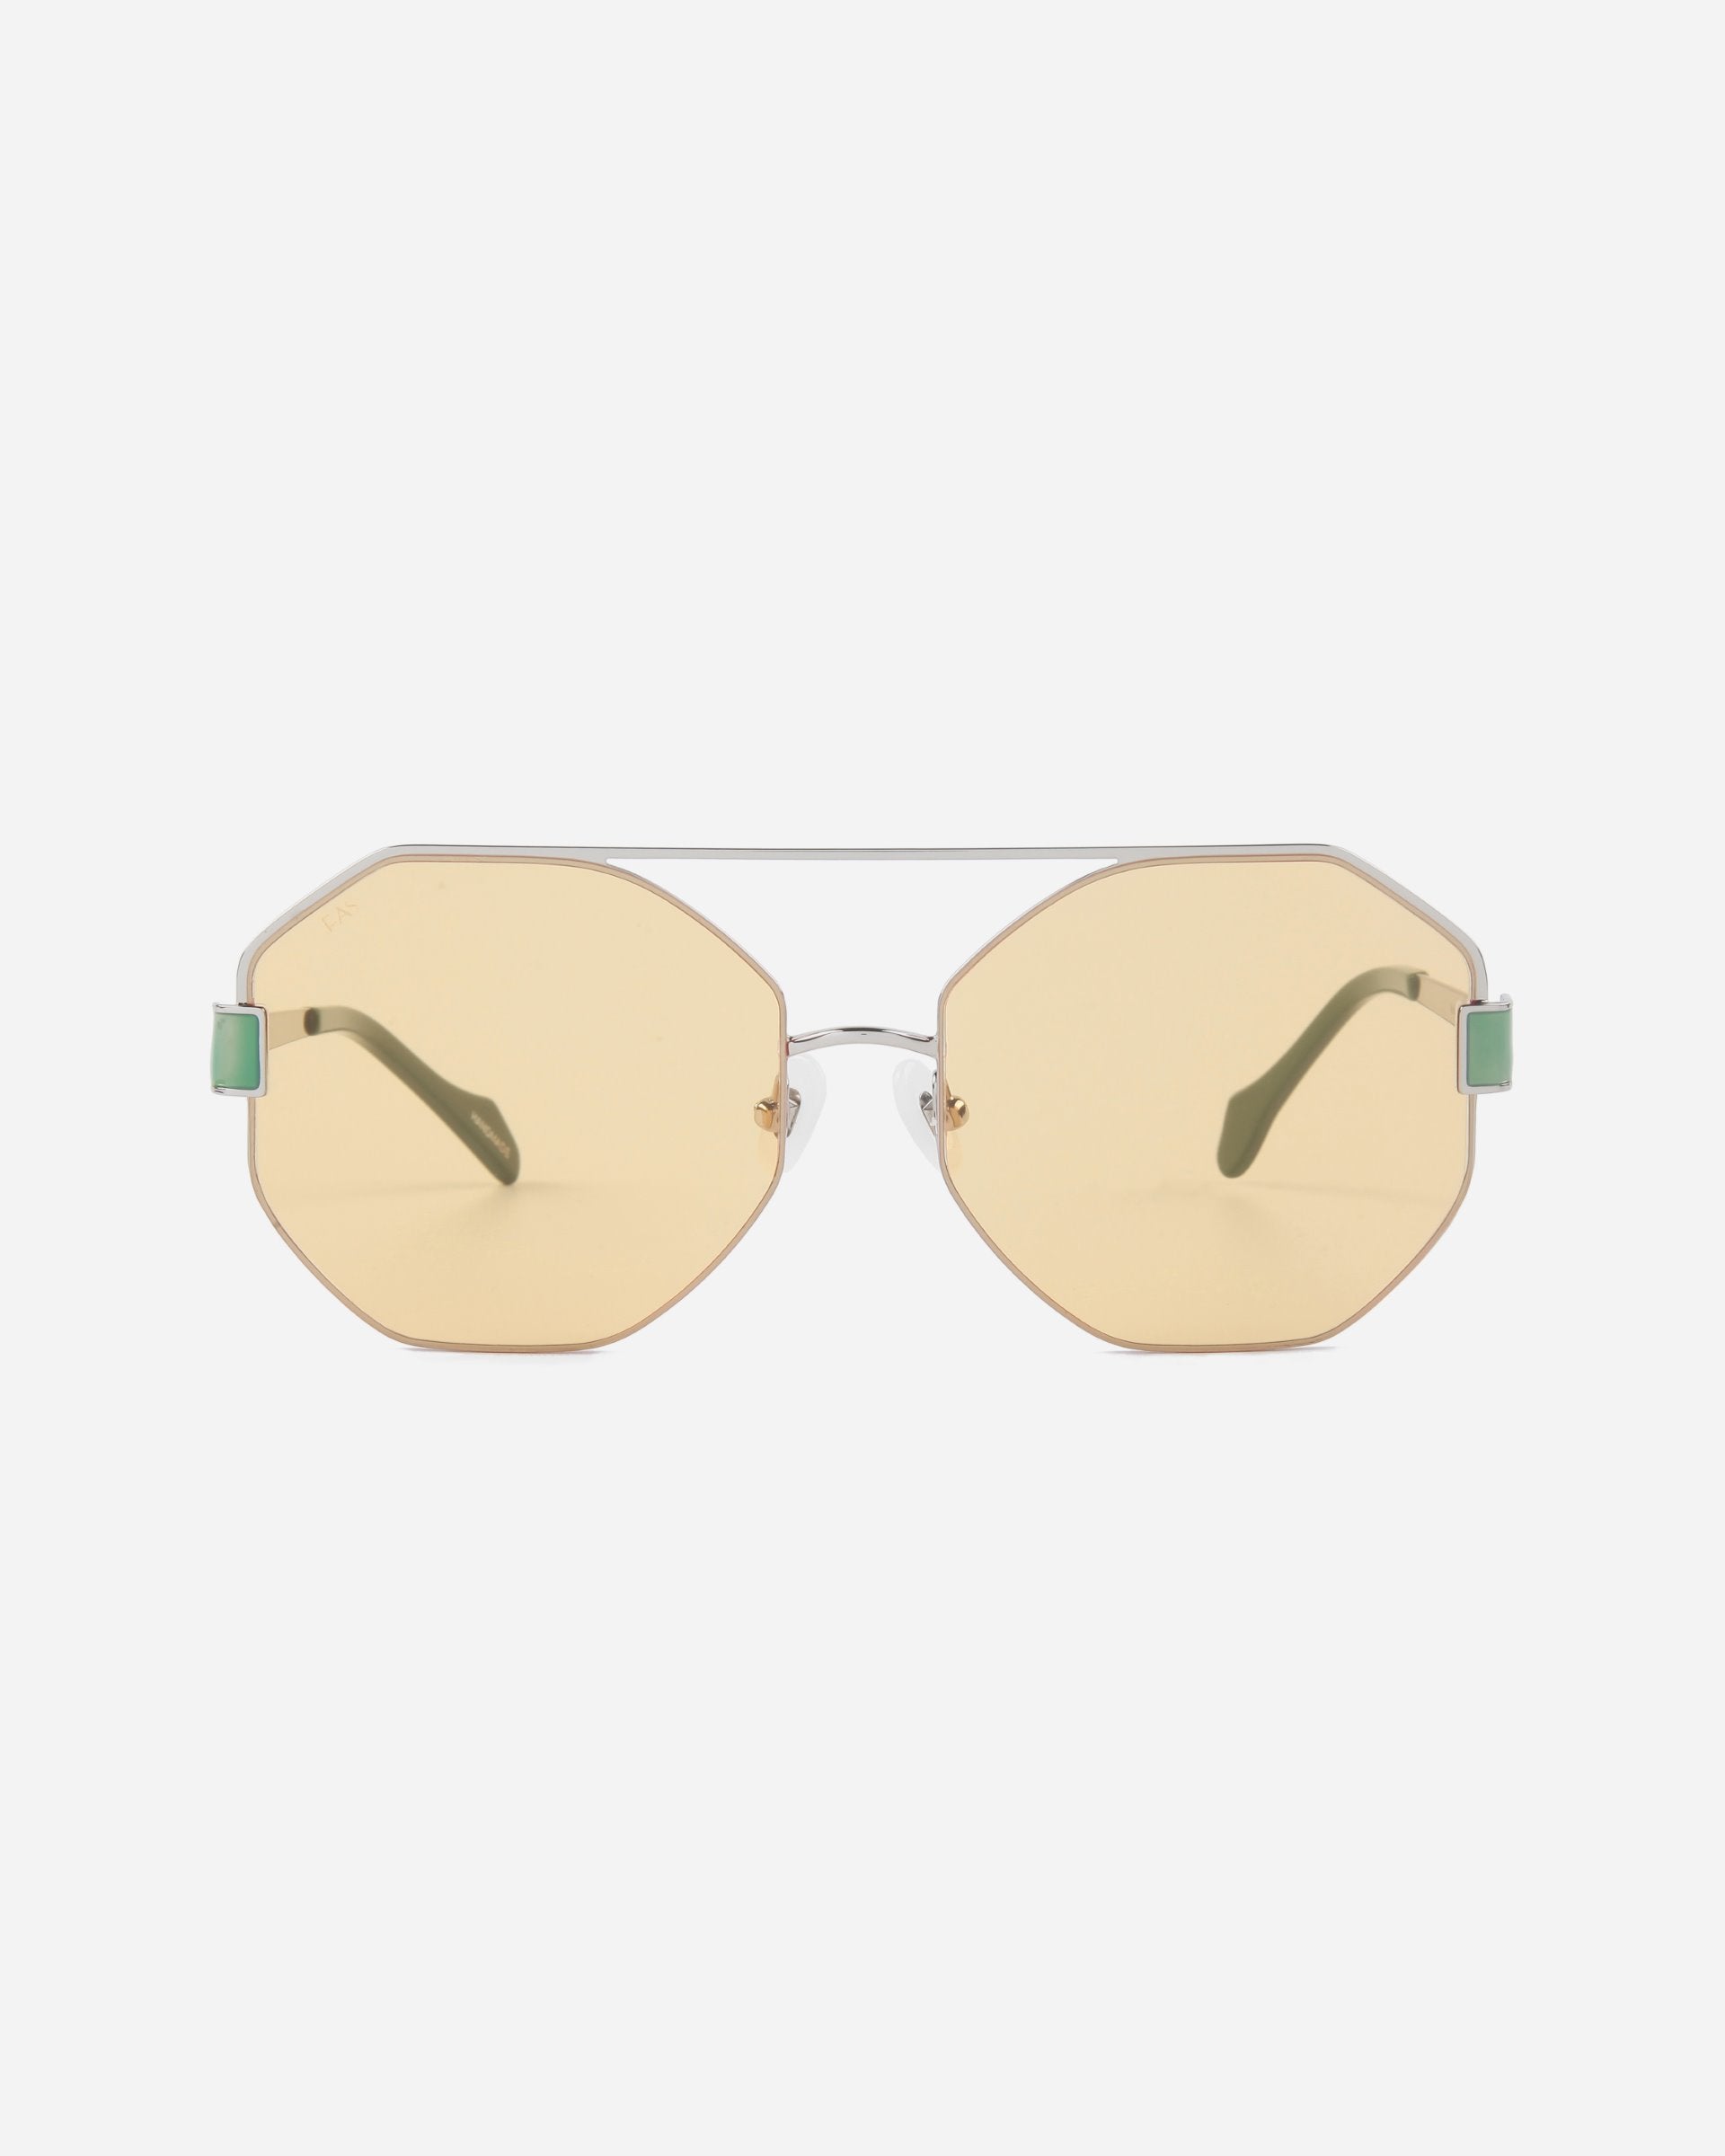 Hexagonal sunglasses with light yellow Nylon lenses and silver stainless steel frames. The Mania by For Art's Sake® sunglasses feature adjustable nosepads, green temple tips, and a minimalist design, set against a plain white background.